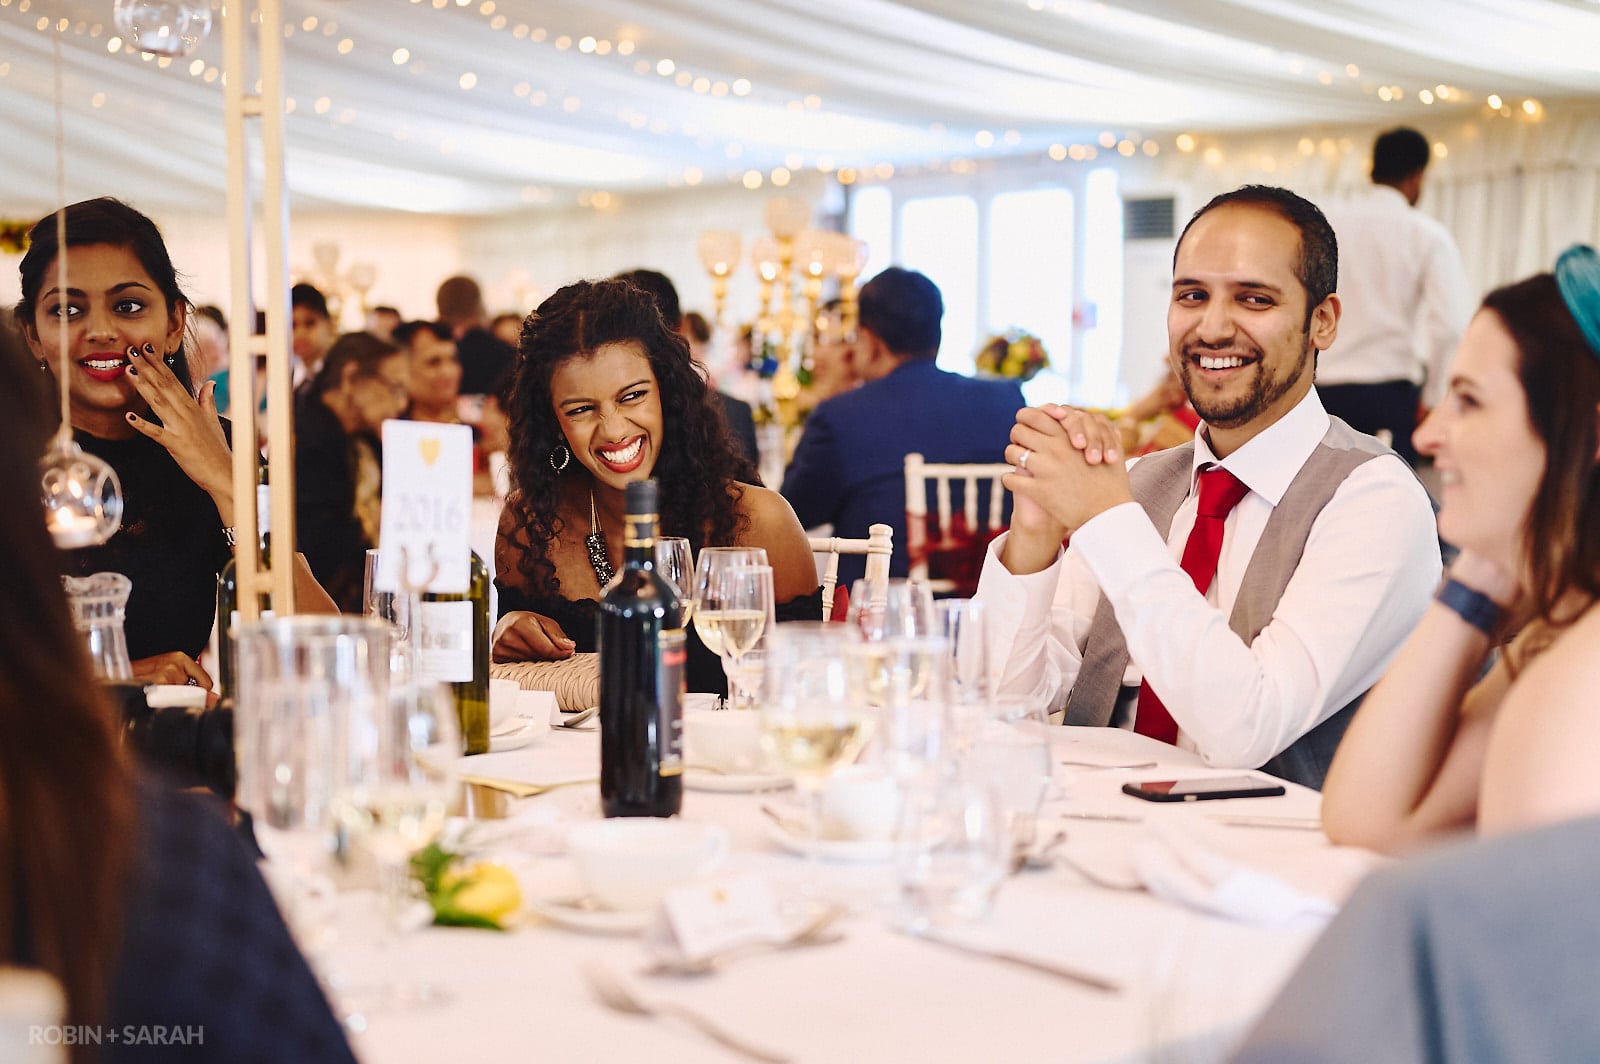 Guests chat and relax during wedding meal